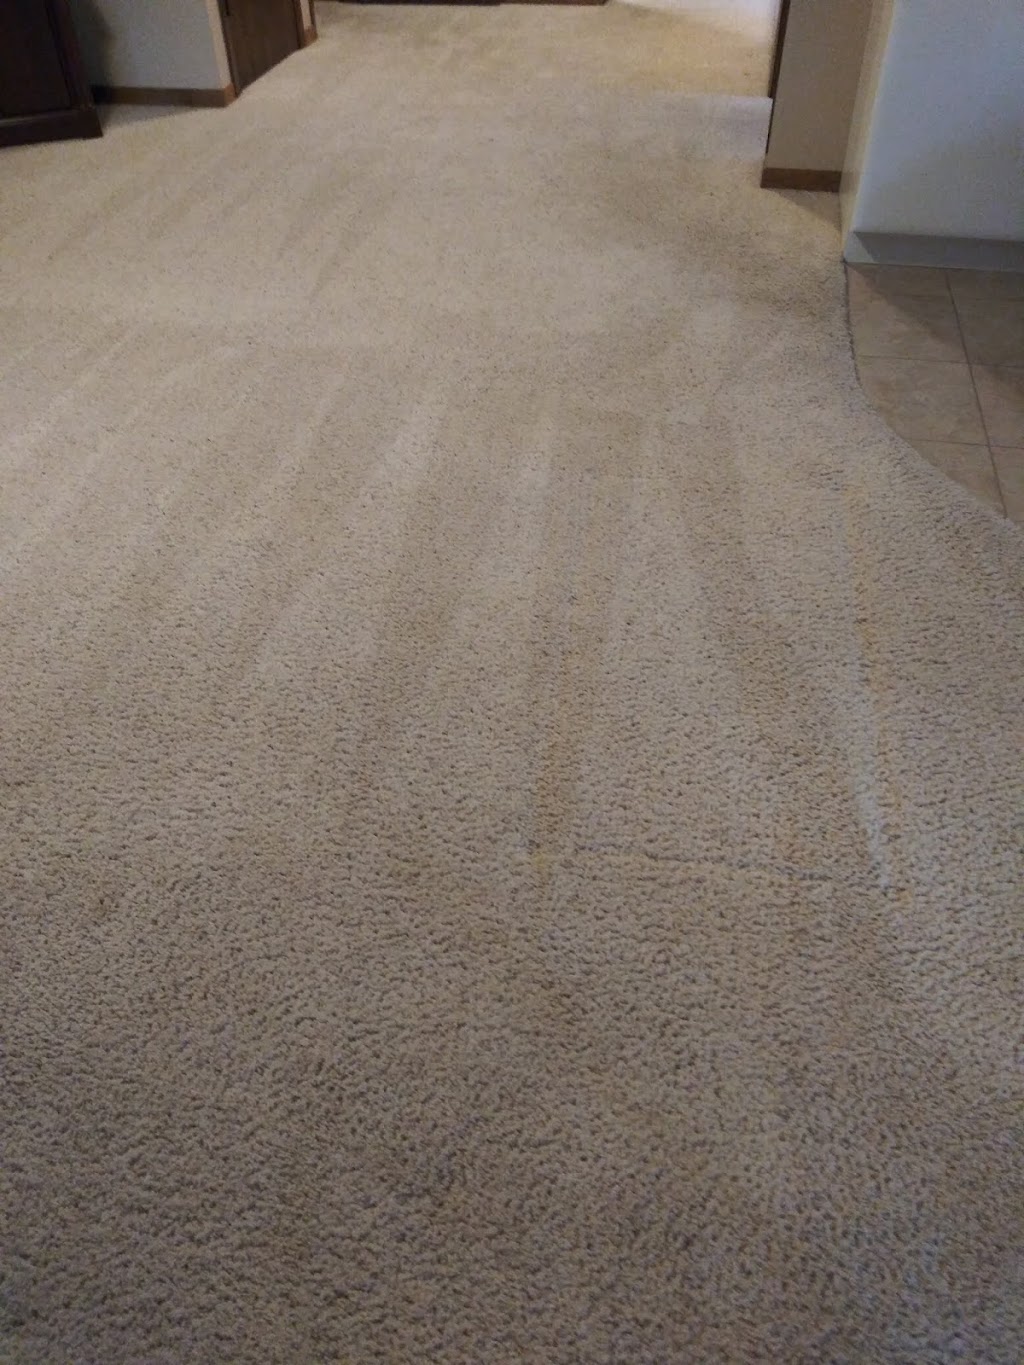 Oxymagic Carpet Cleaning | 38527 Branch Ave, North Branch, MN 55056 | Phone: (763) 213-6217